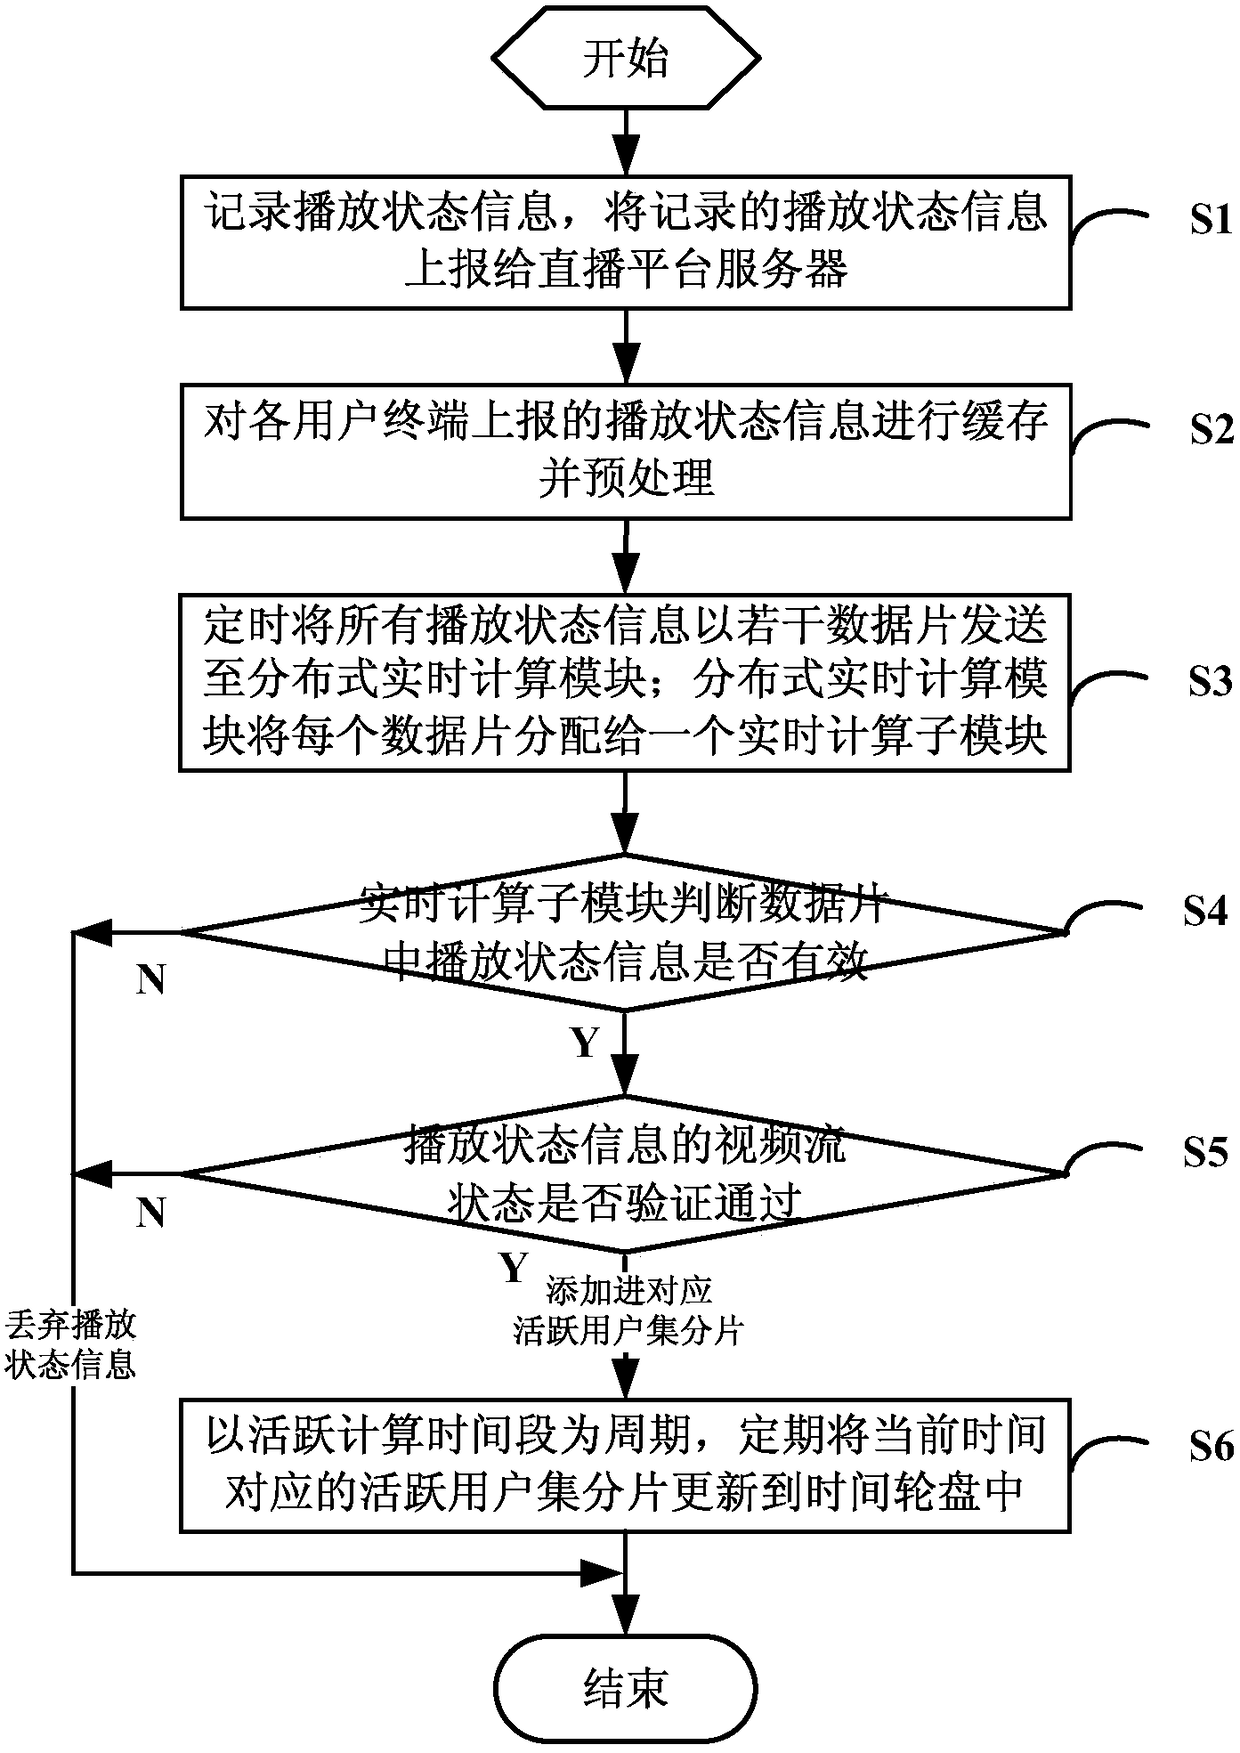 Active user set maintenance system and method based on time wheel and play status